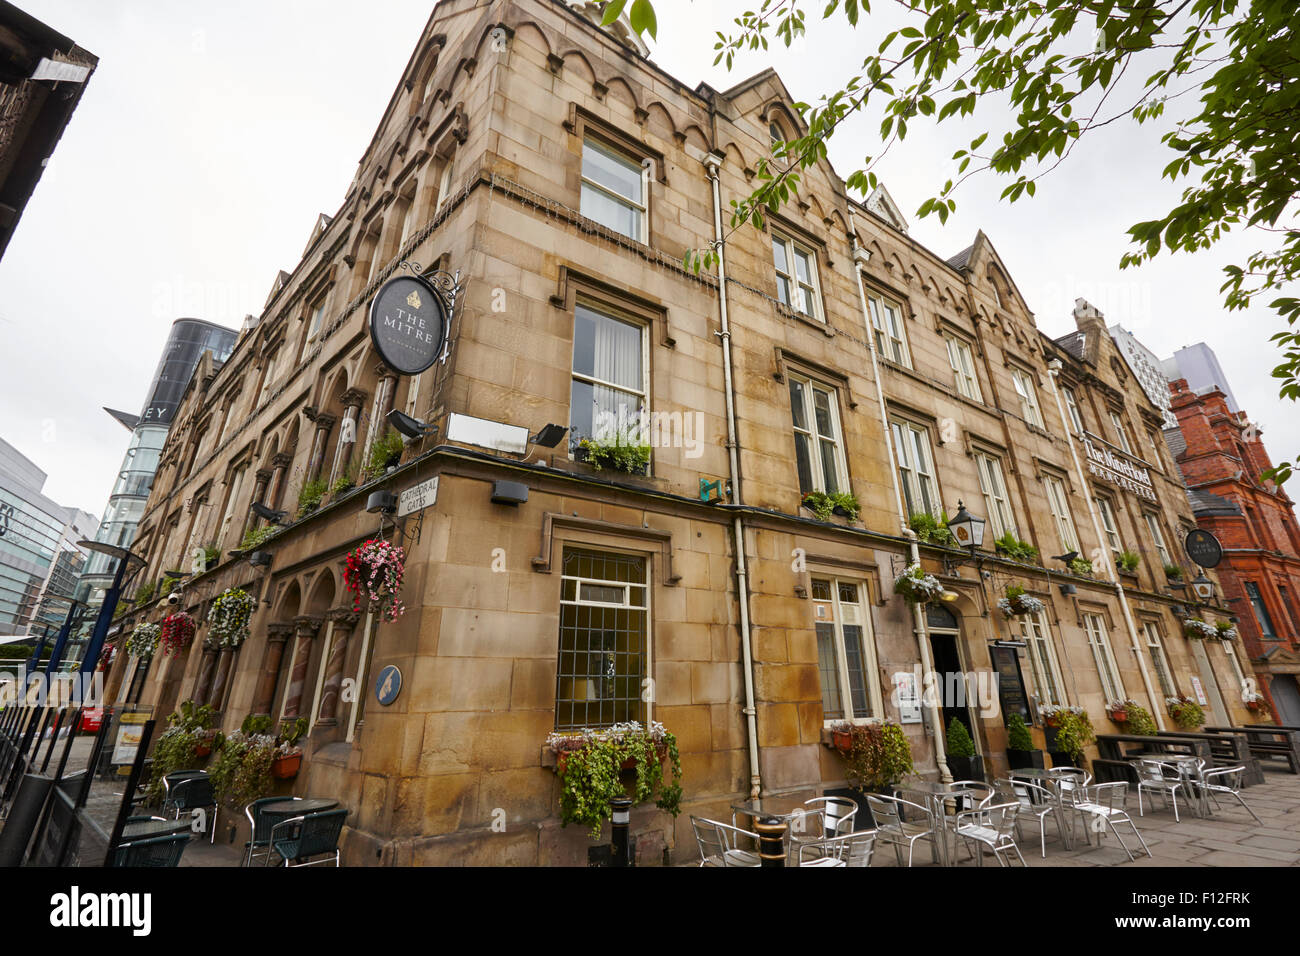 the mitre hotel Manchester uk Stock Photo